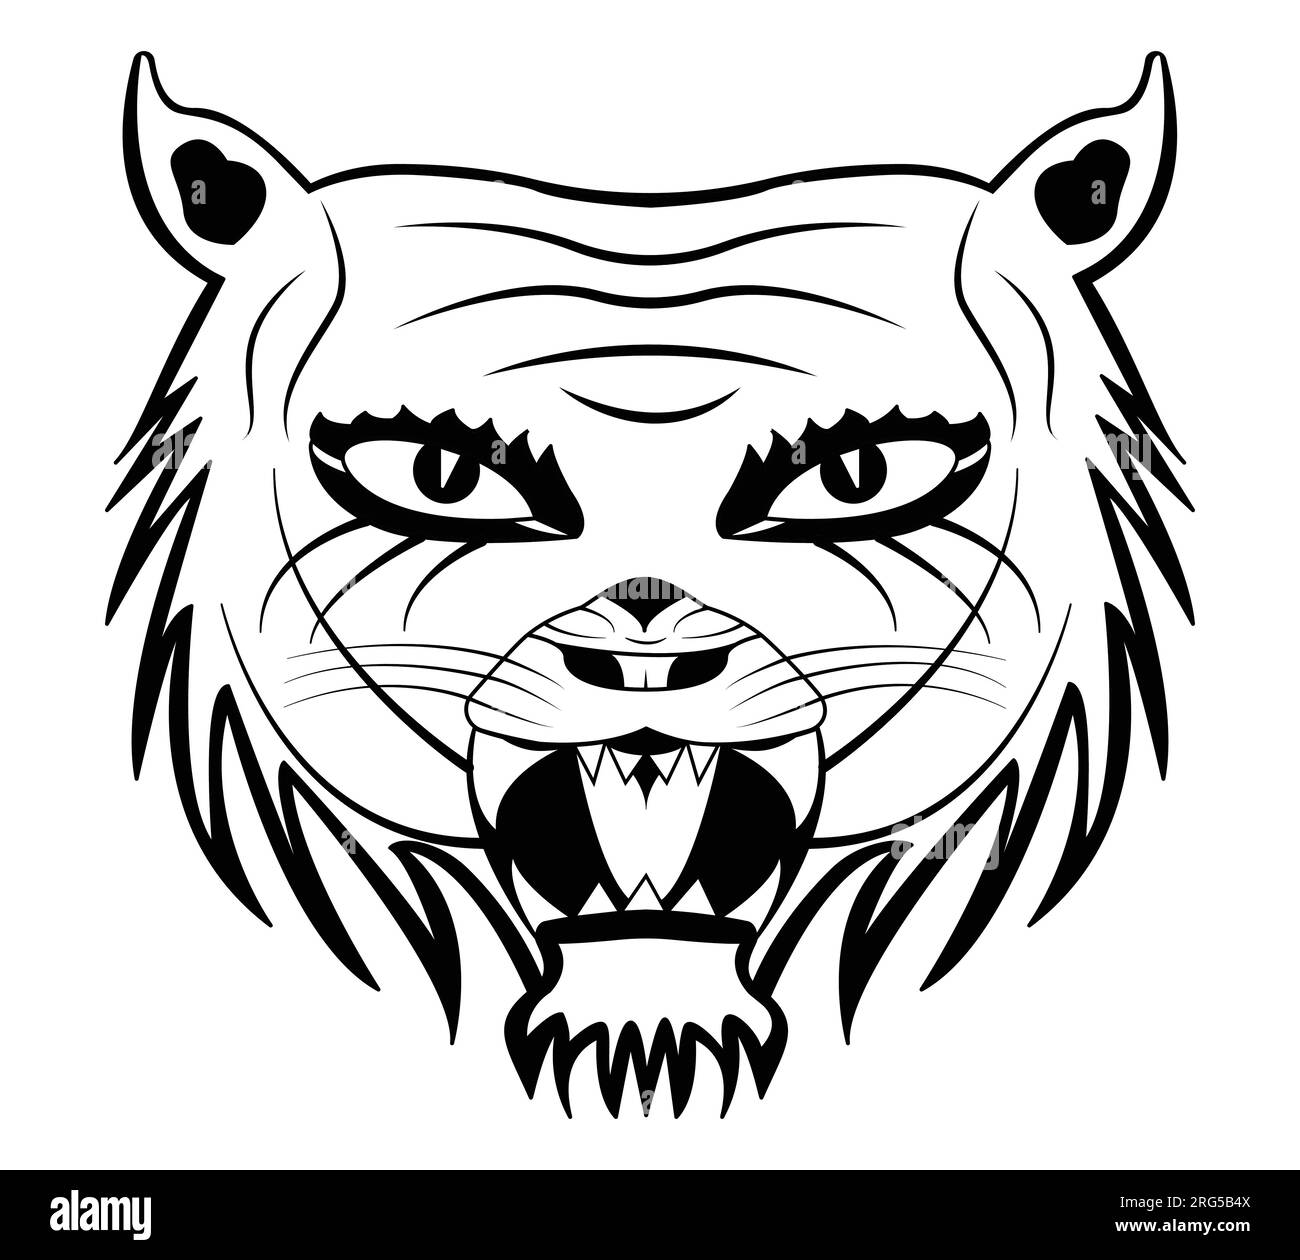 tiger face icon. vectors, illustrations, icons, avatars and logos. Stock Vector